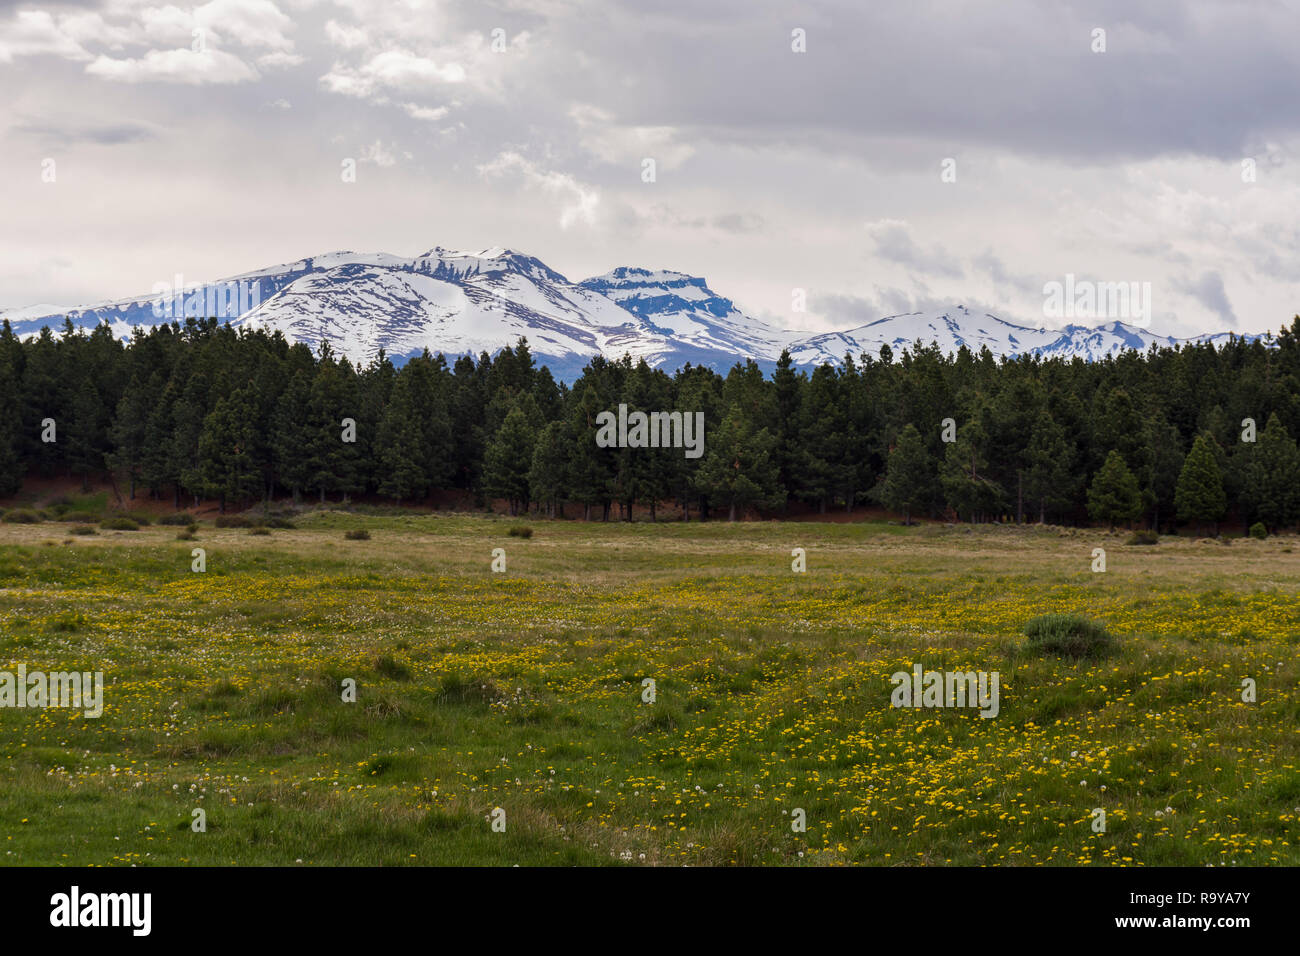 Scenic View of a Field of Dandelions against snow-capped mountains during Spring Season in Patagonia, Argentina Stock Photo